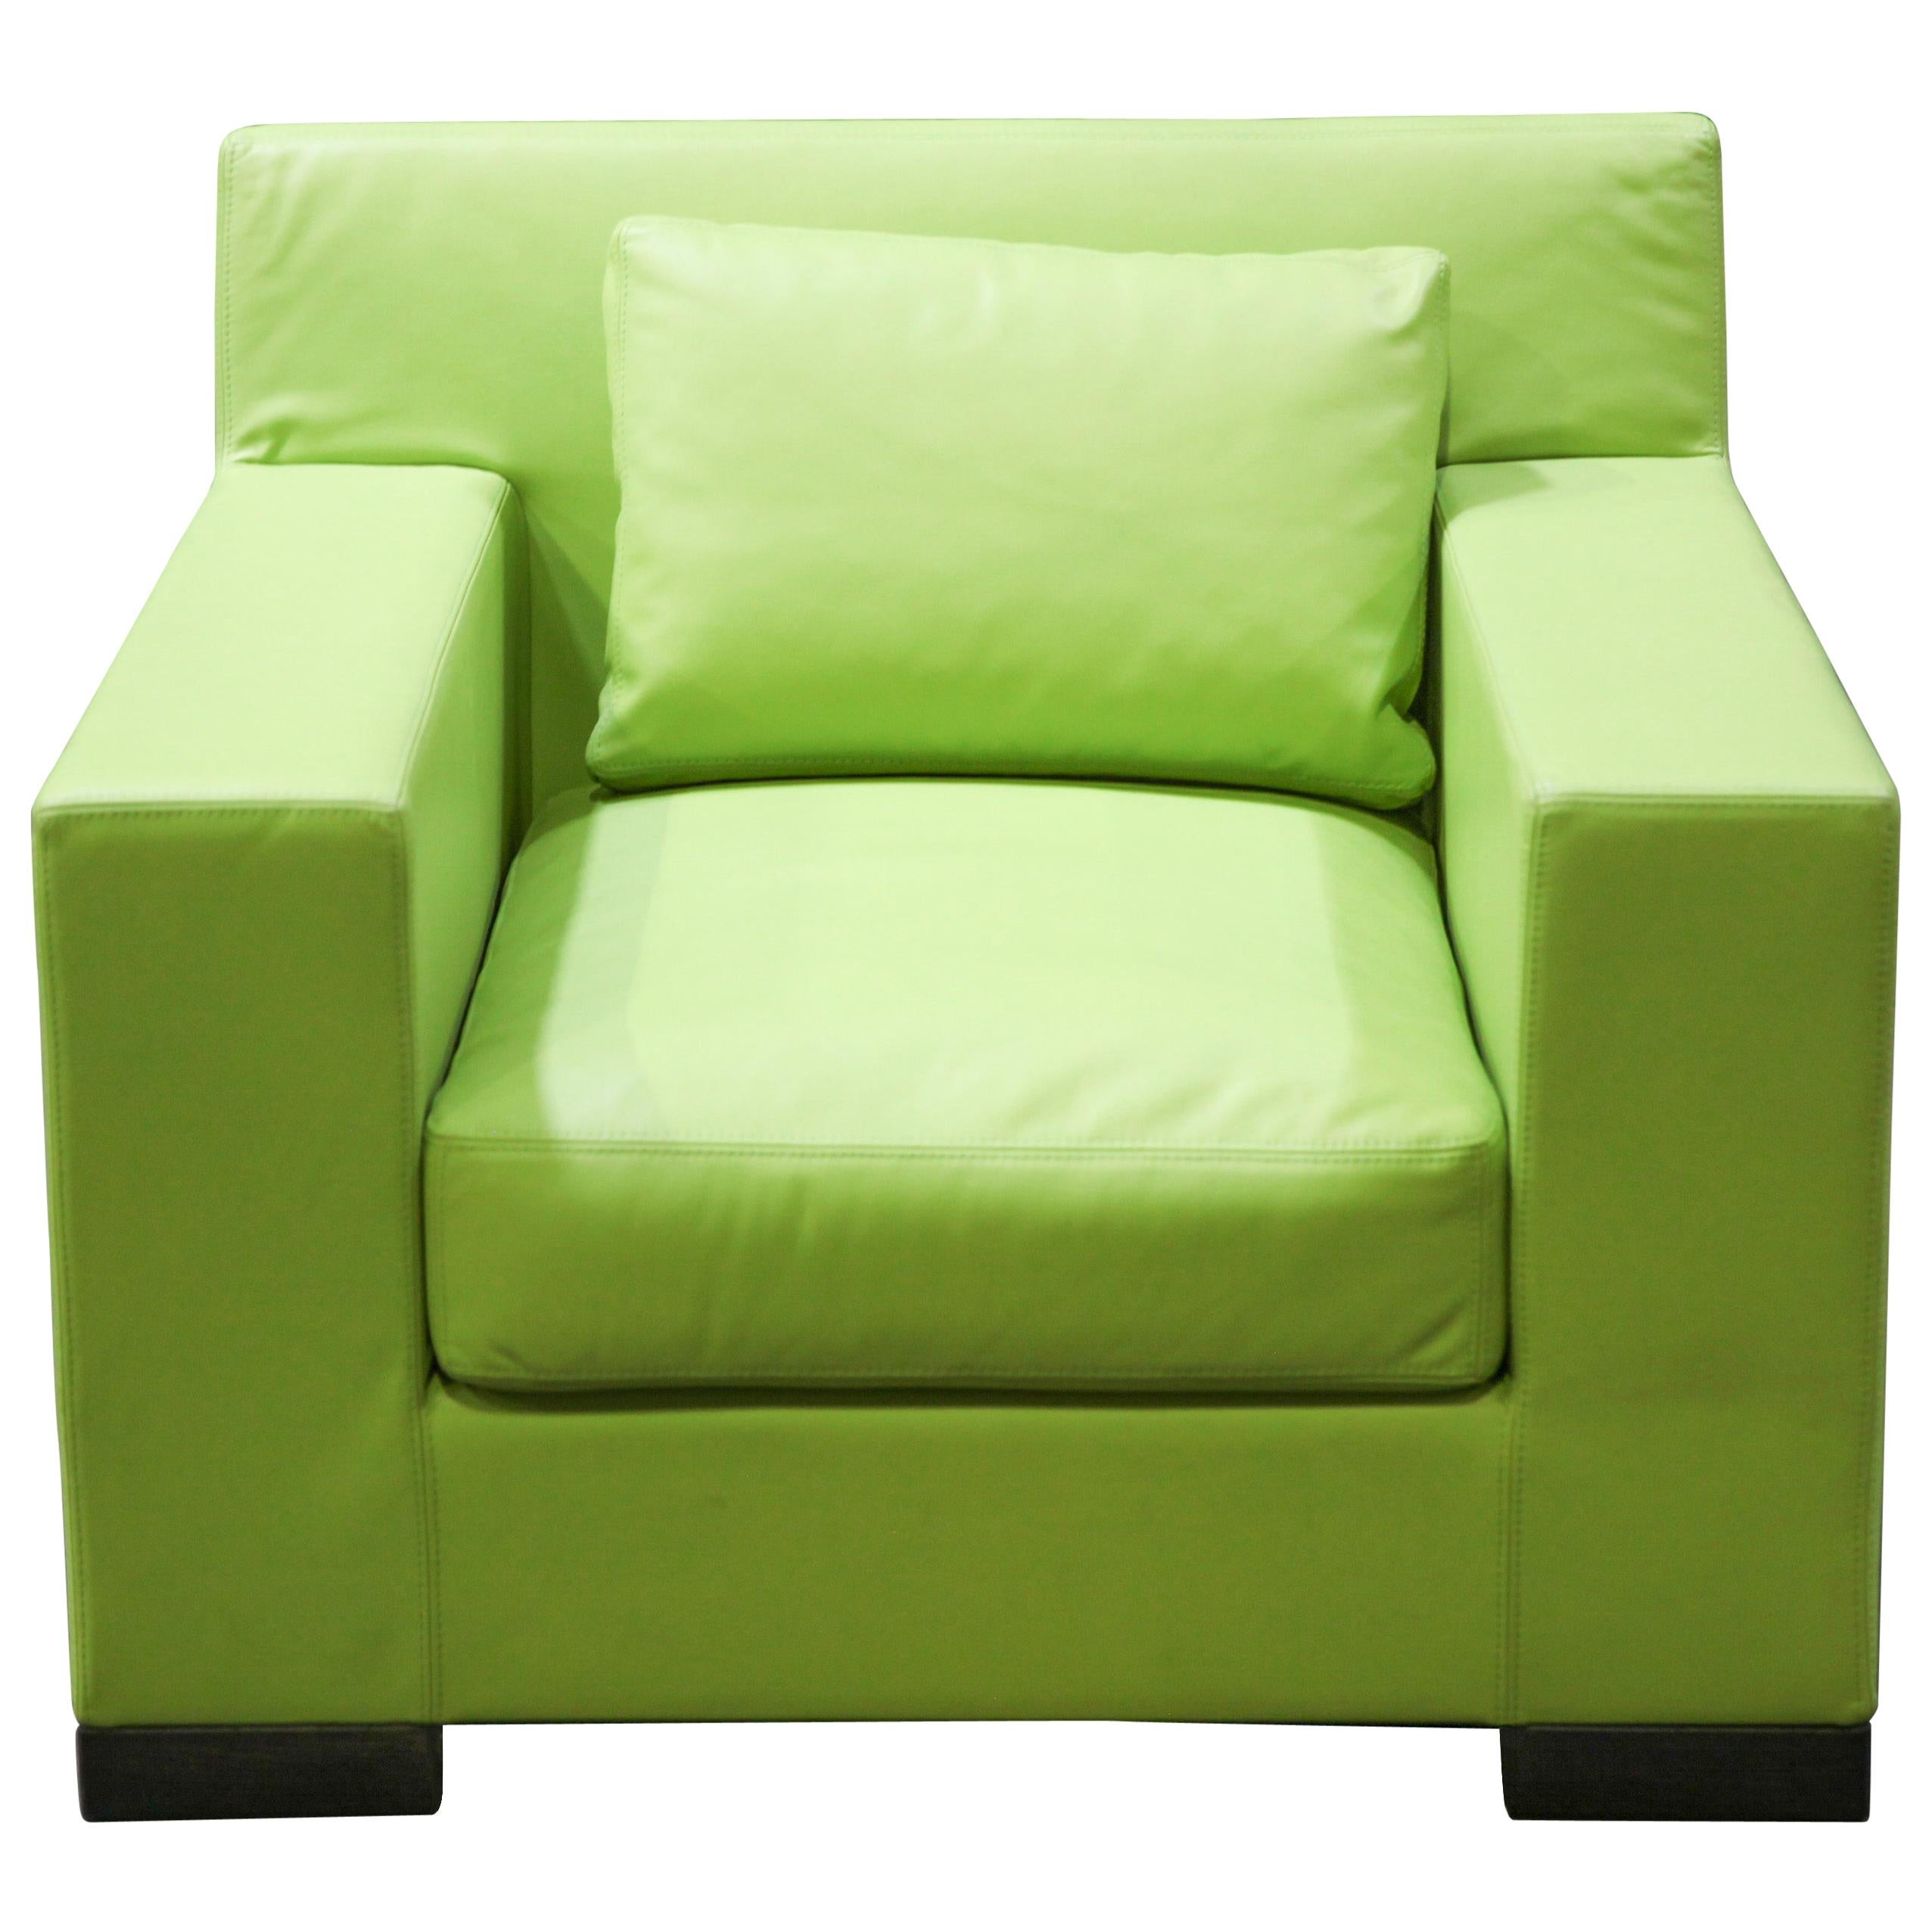 Ideo Modern Club Chair in Green Leather Upholstery